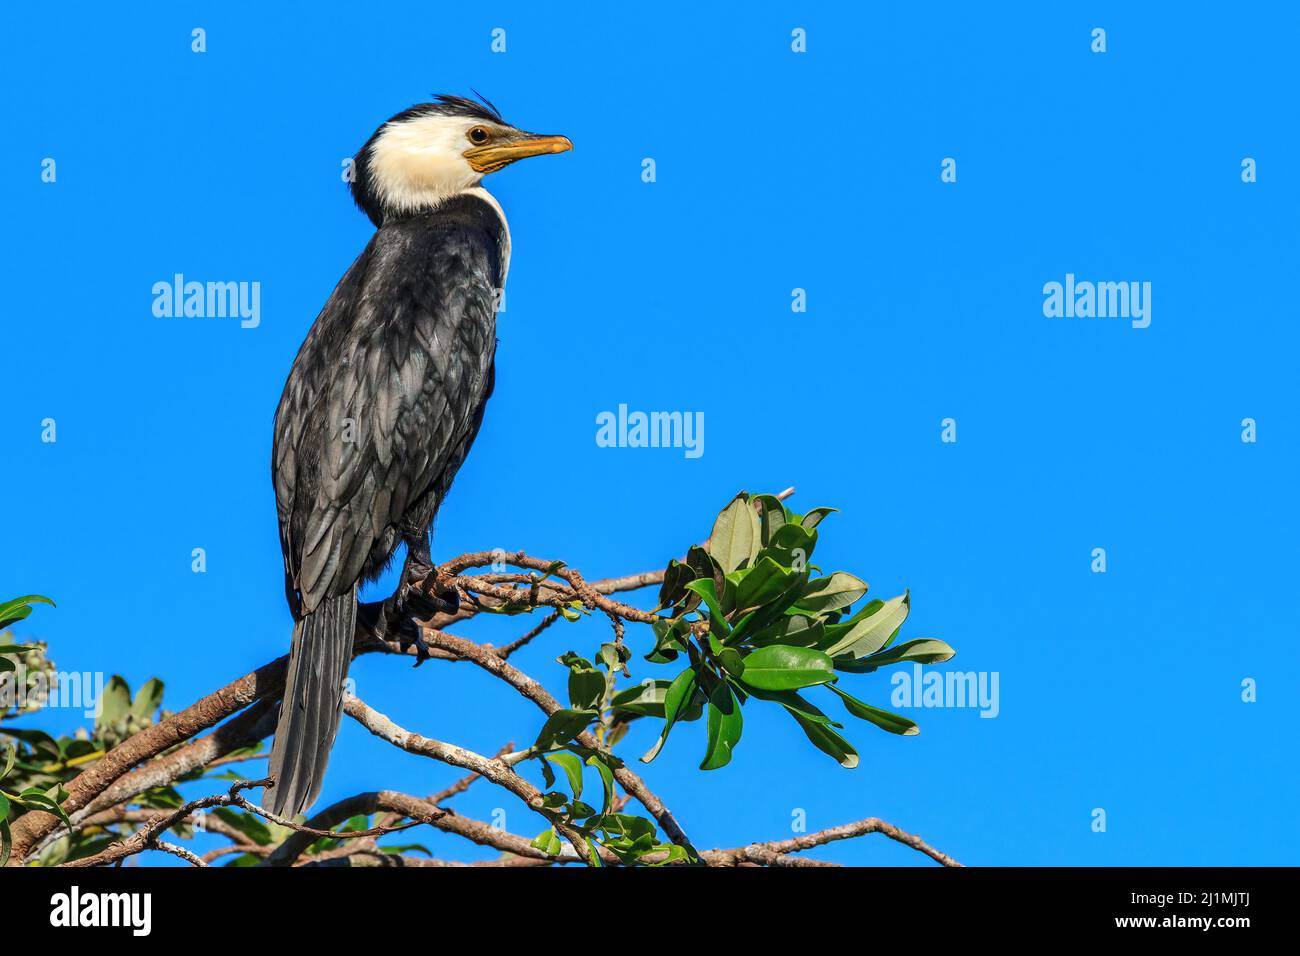 A little pied cormorant or little shag (Microcarbo melanoleucos). The little crest on the head indicates it is breeding season. New Zealand Stock Photo